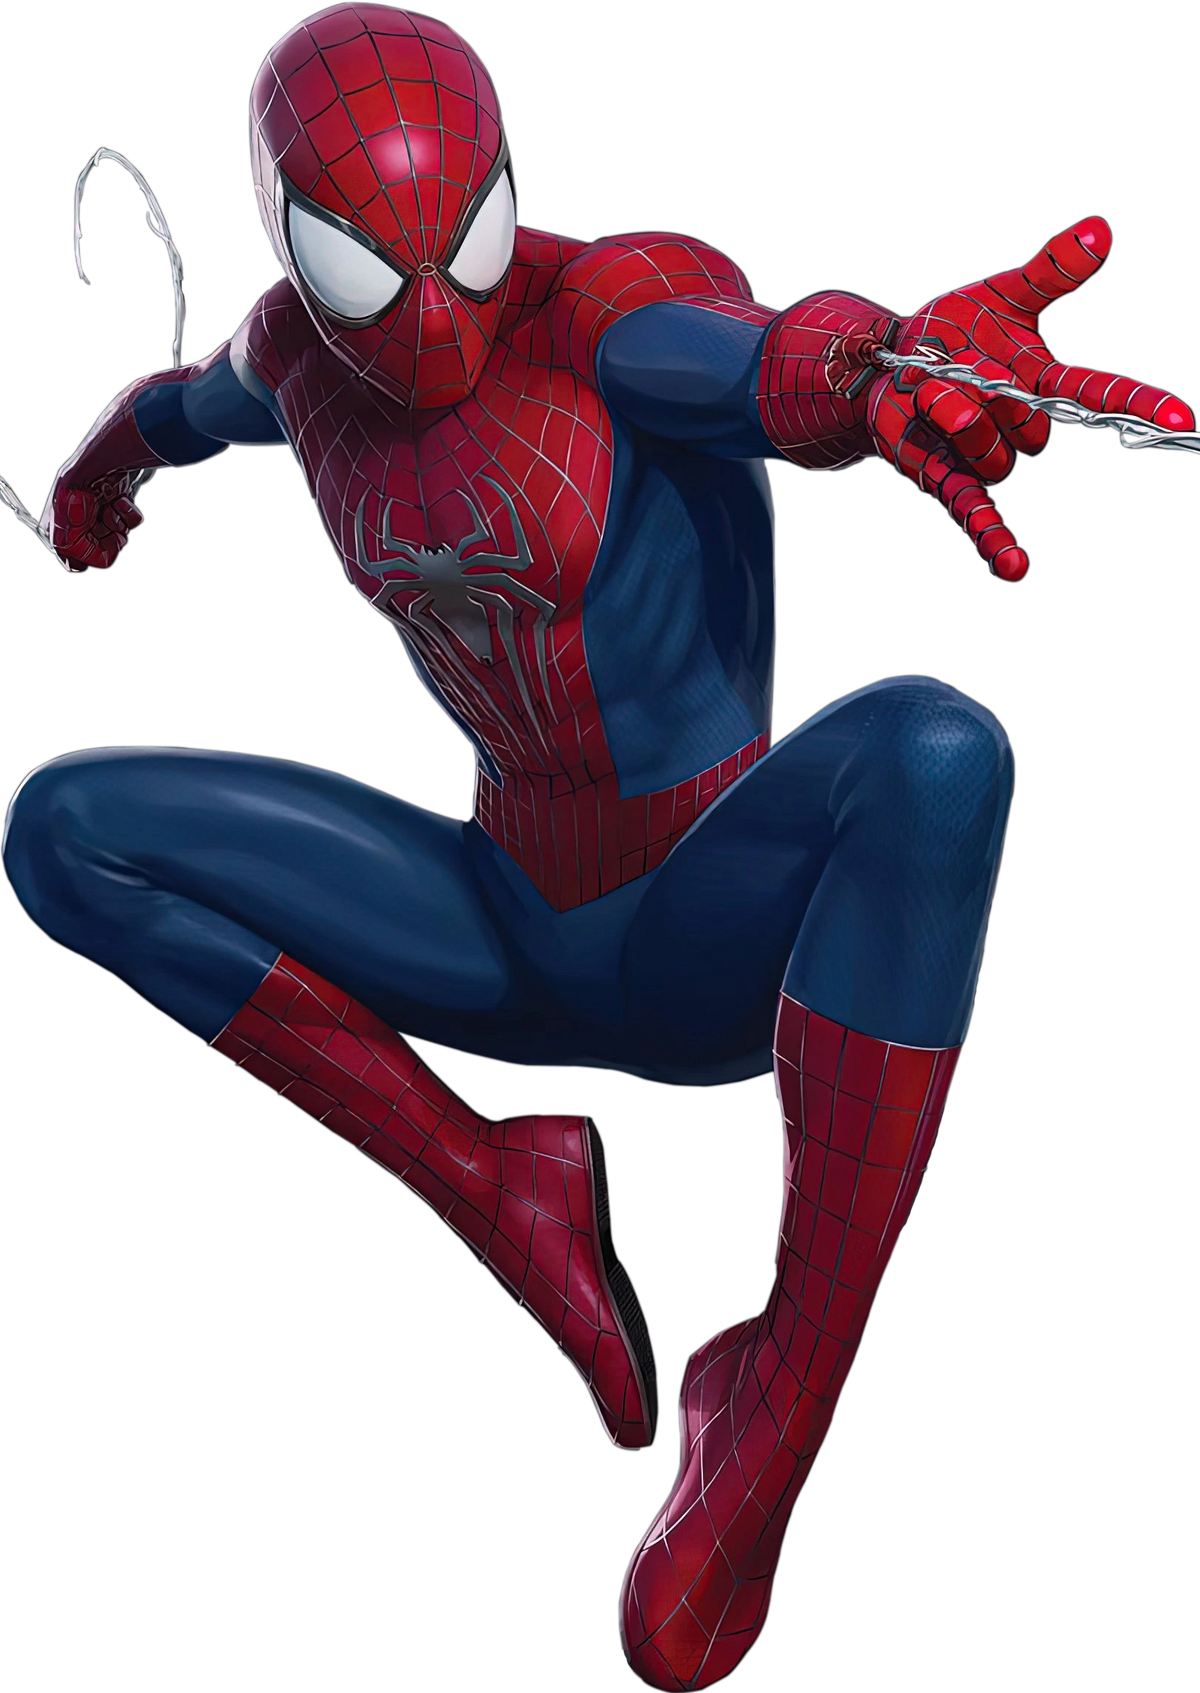 Cast & Characters - The Amazing Spider-Man 2 Guide - IGN